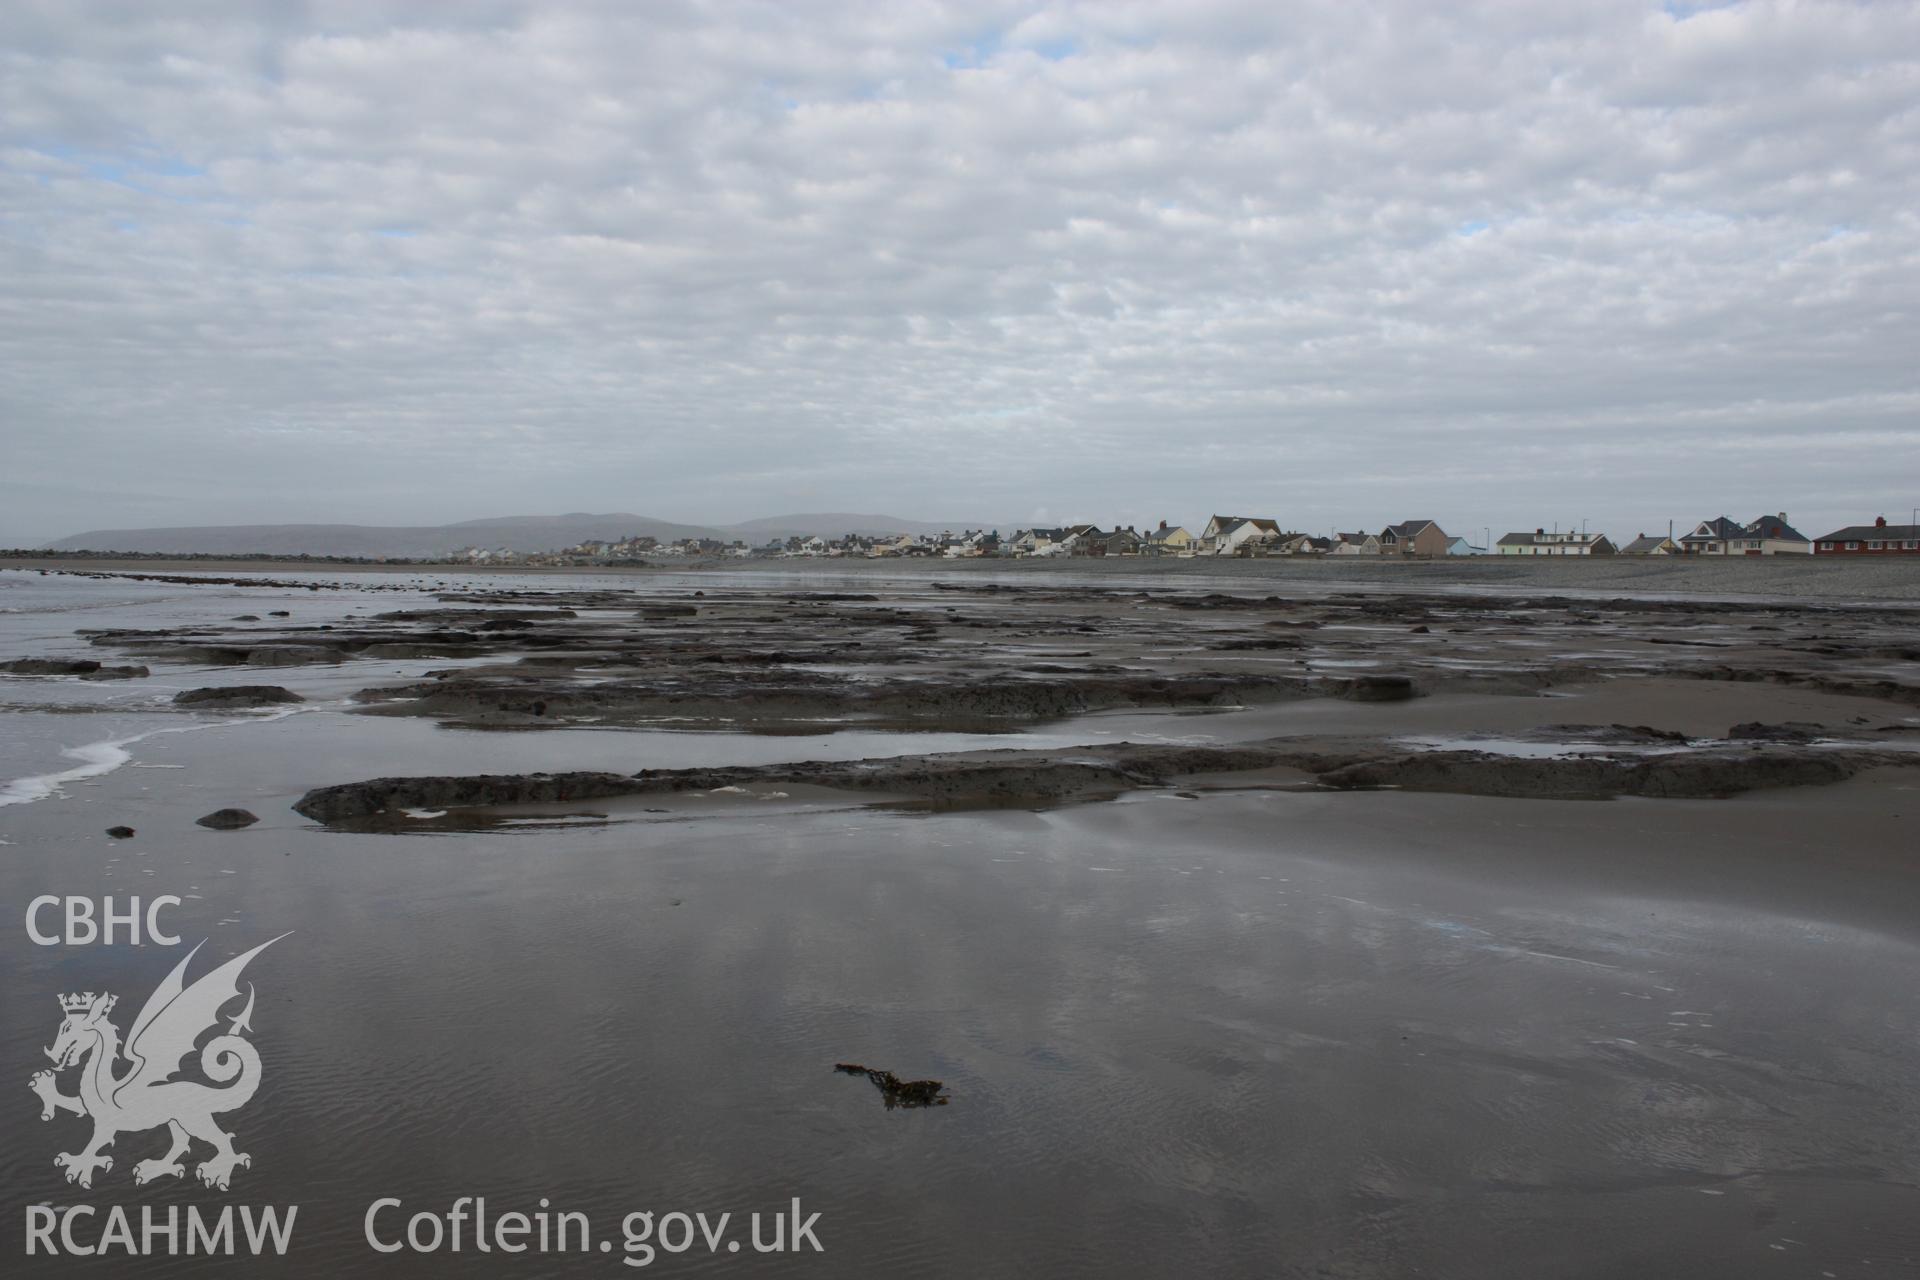 Borth submerged forest (between RNLI lifeboat station and upper Borth), looking northeast towards High Street and Ynyslas. Showing western extent of peat exposures (with temporary causeway leading to artificial reef, centre left).